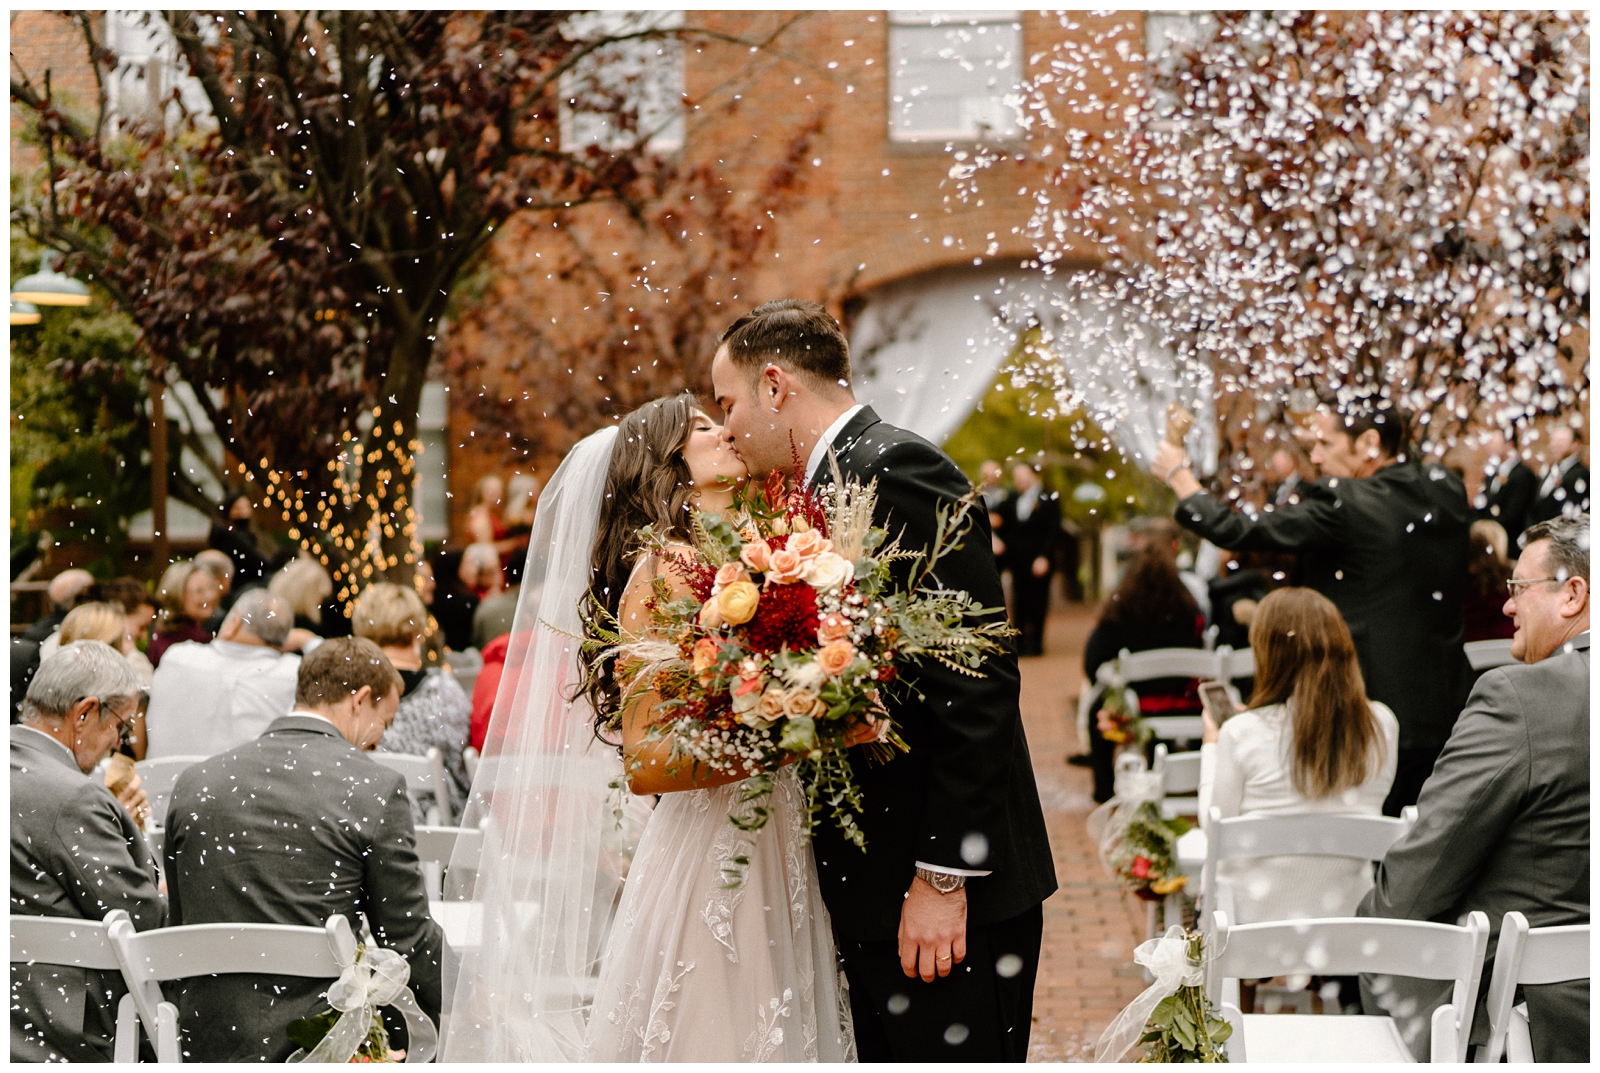 How to have the best wedding for you: tips, tricks, and advice by North Carolina elopement photographer